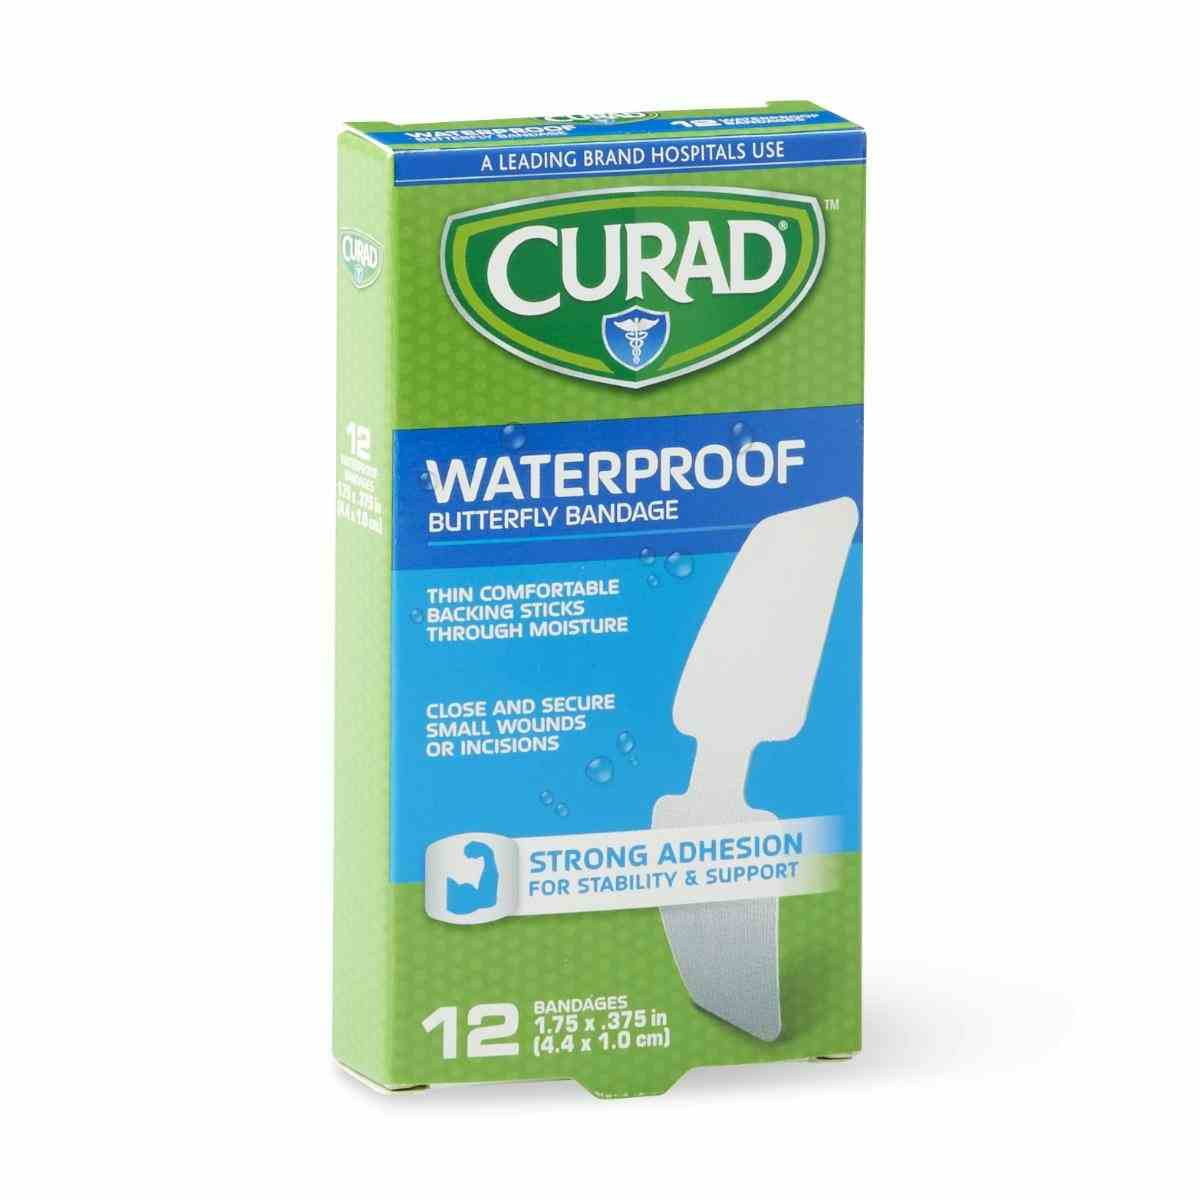 Curad Butterfly Waterproof Adhesive Bandages, CUR47442RB, 1 3/4" X 3/8" - Case of 24